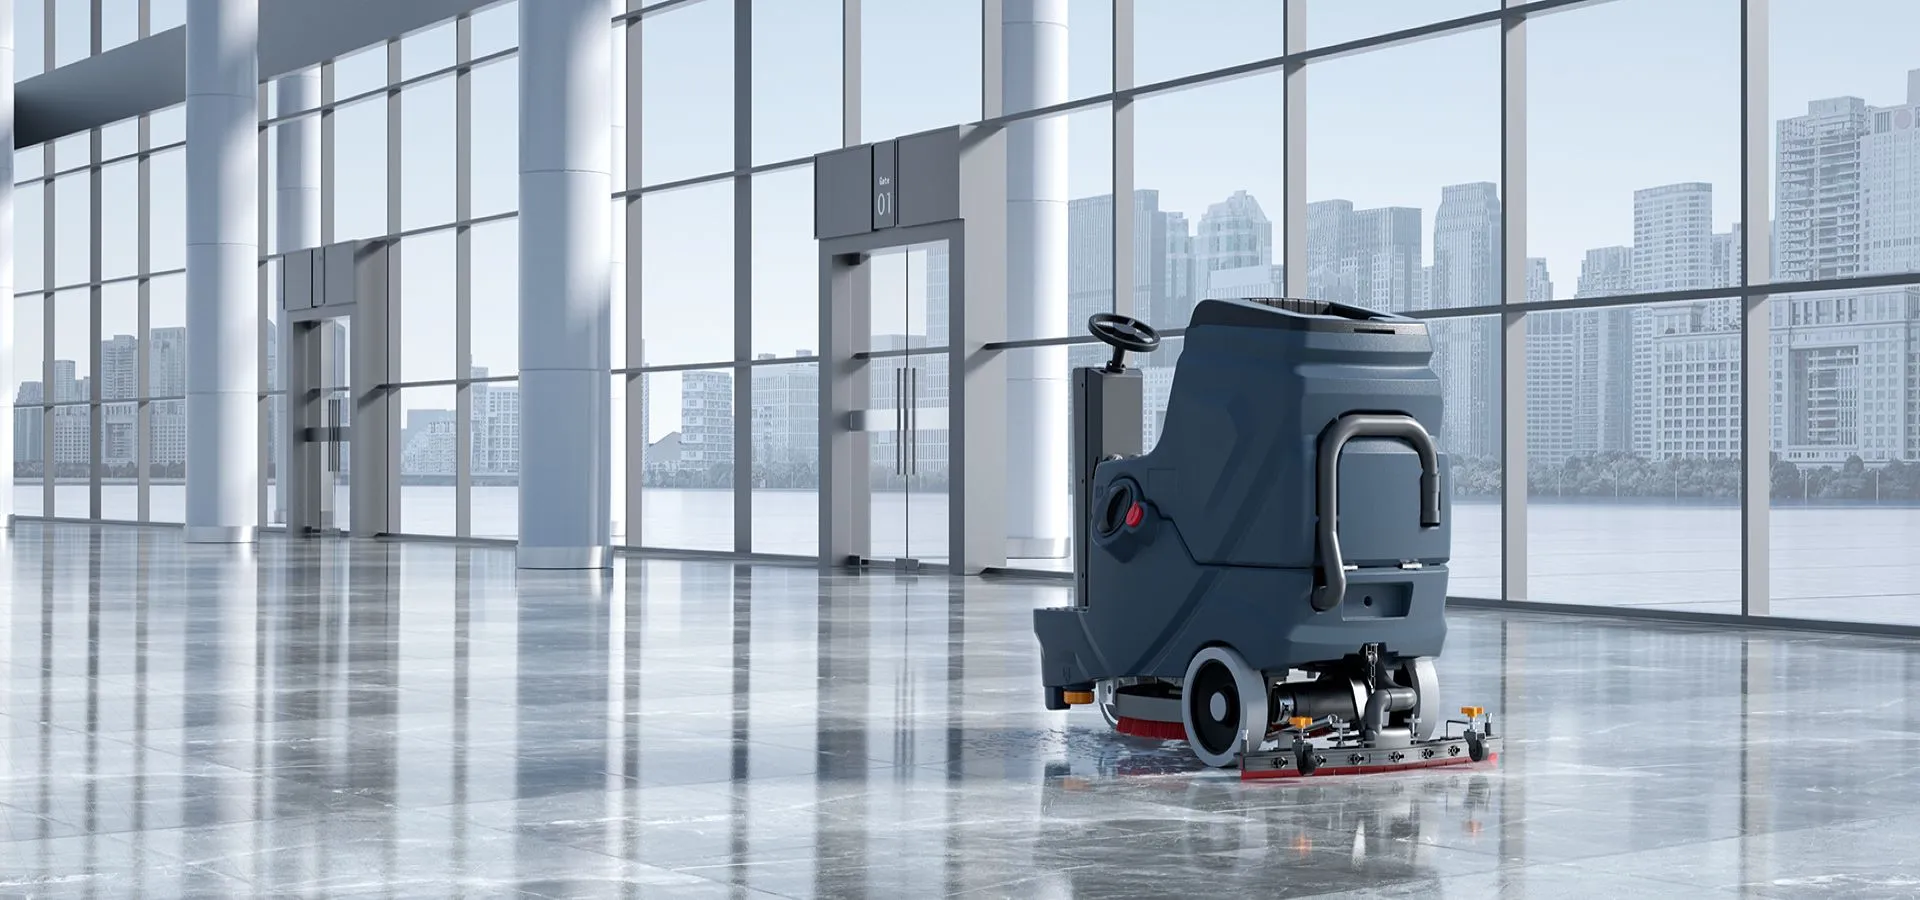 Floor cleaning machines for professional and industrial use